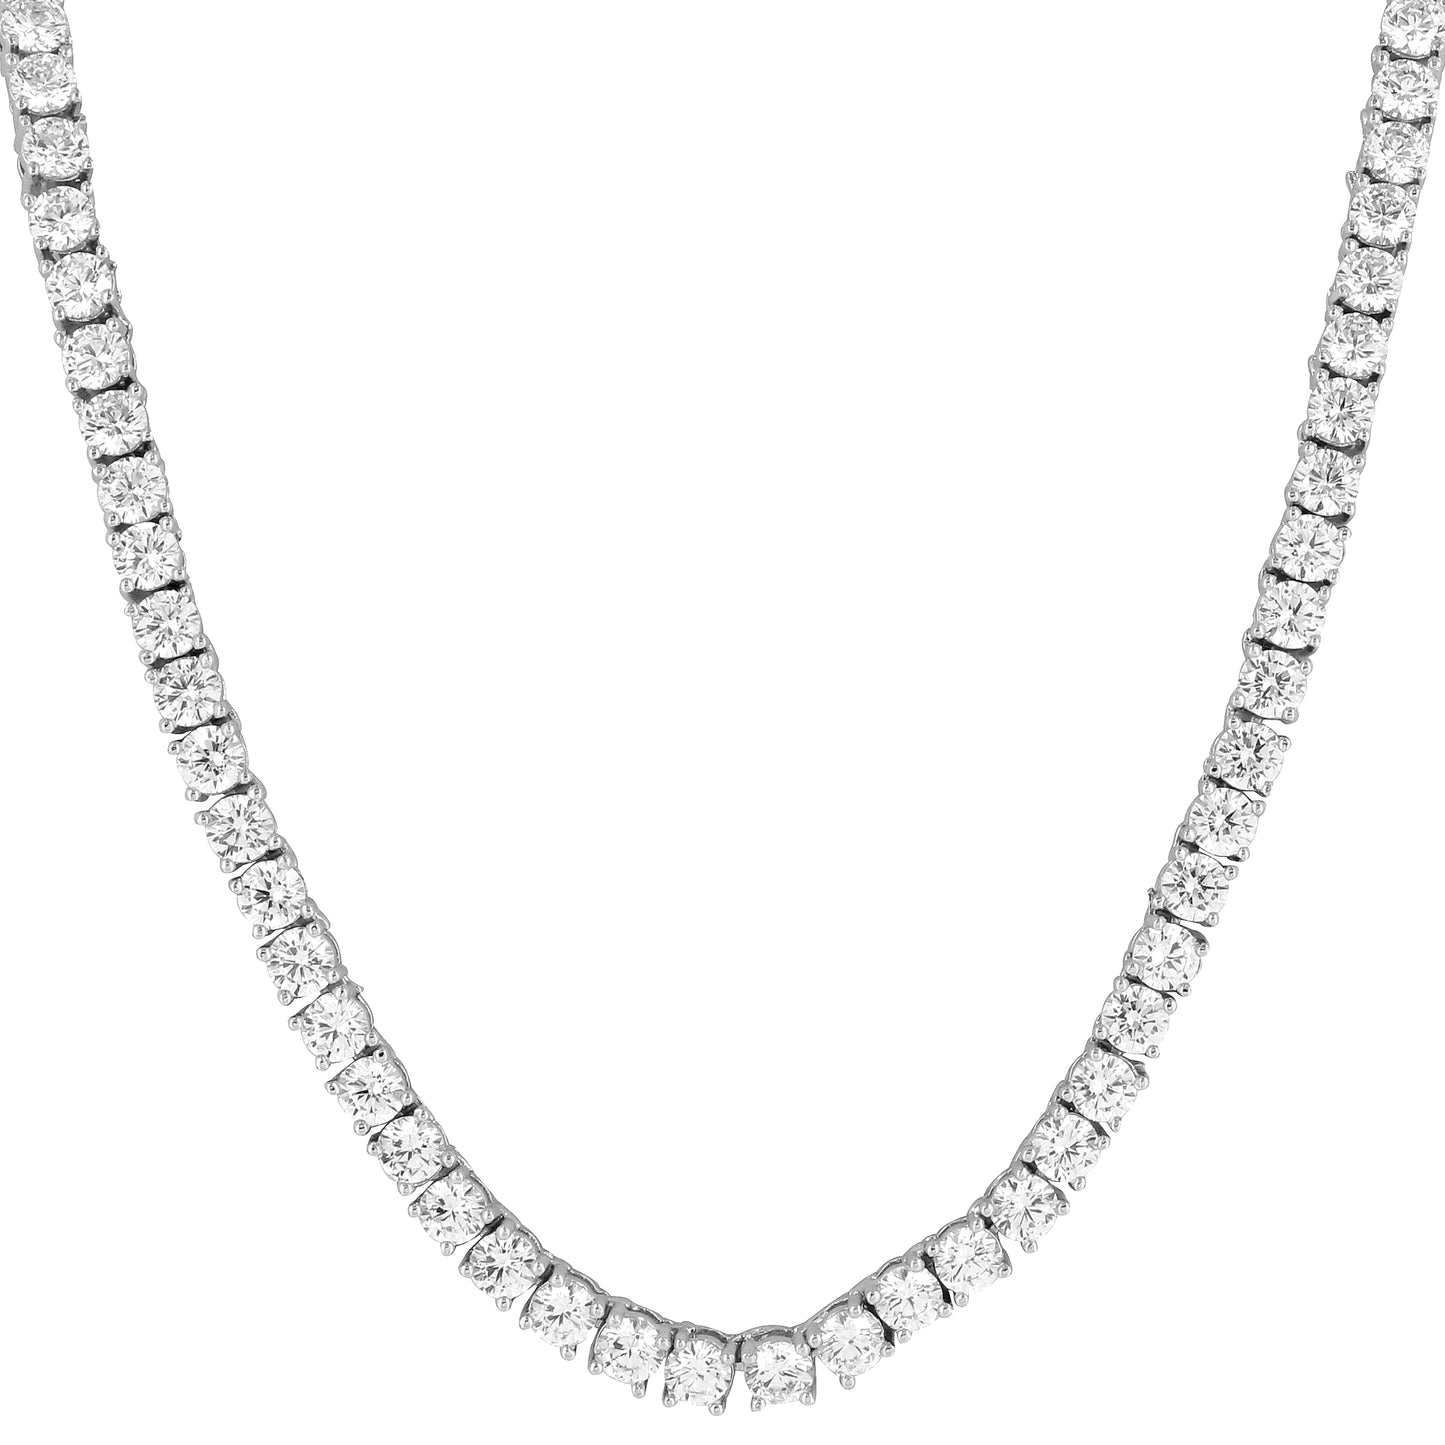 3mm 14k White Gold Finish Silver Tennis Necklace 18-30"